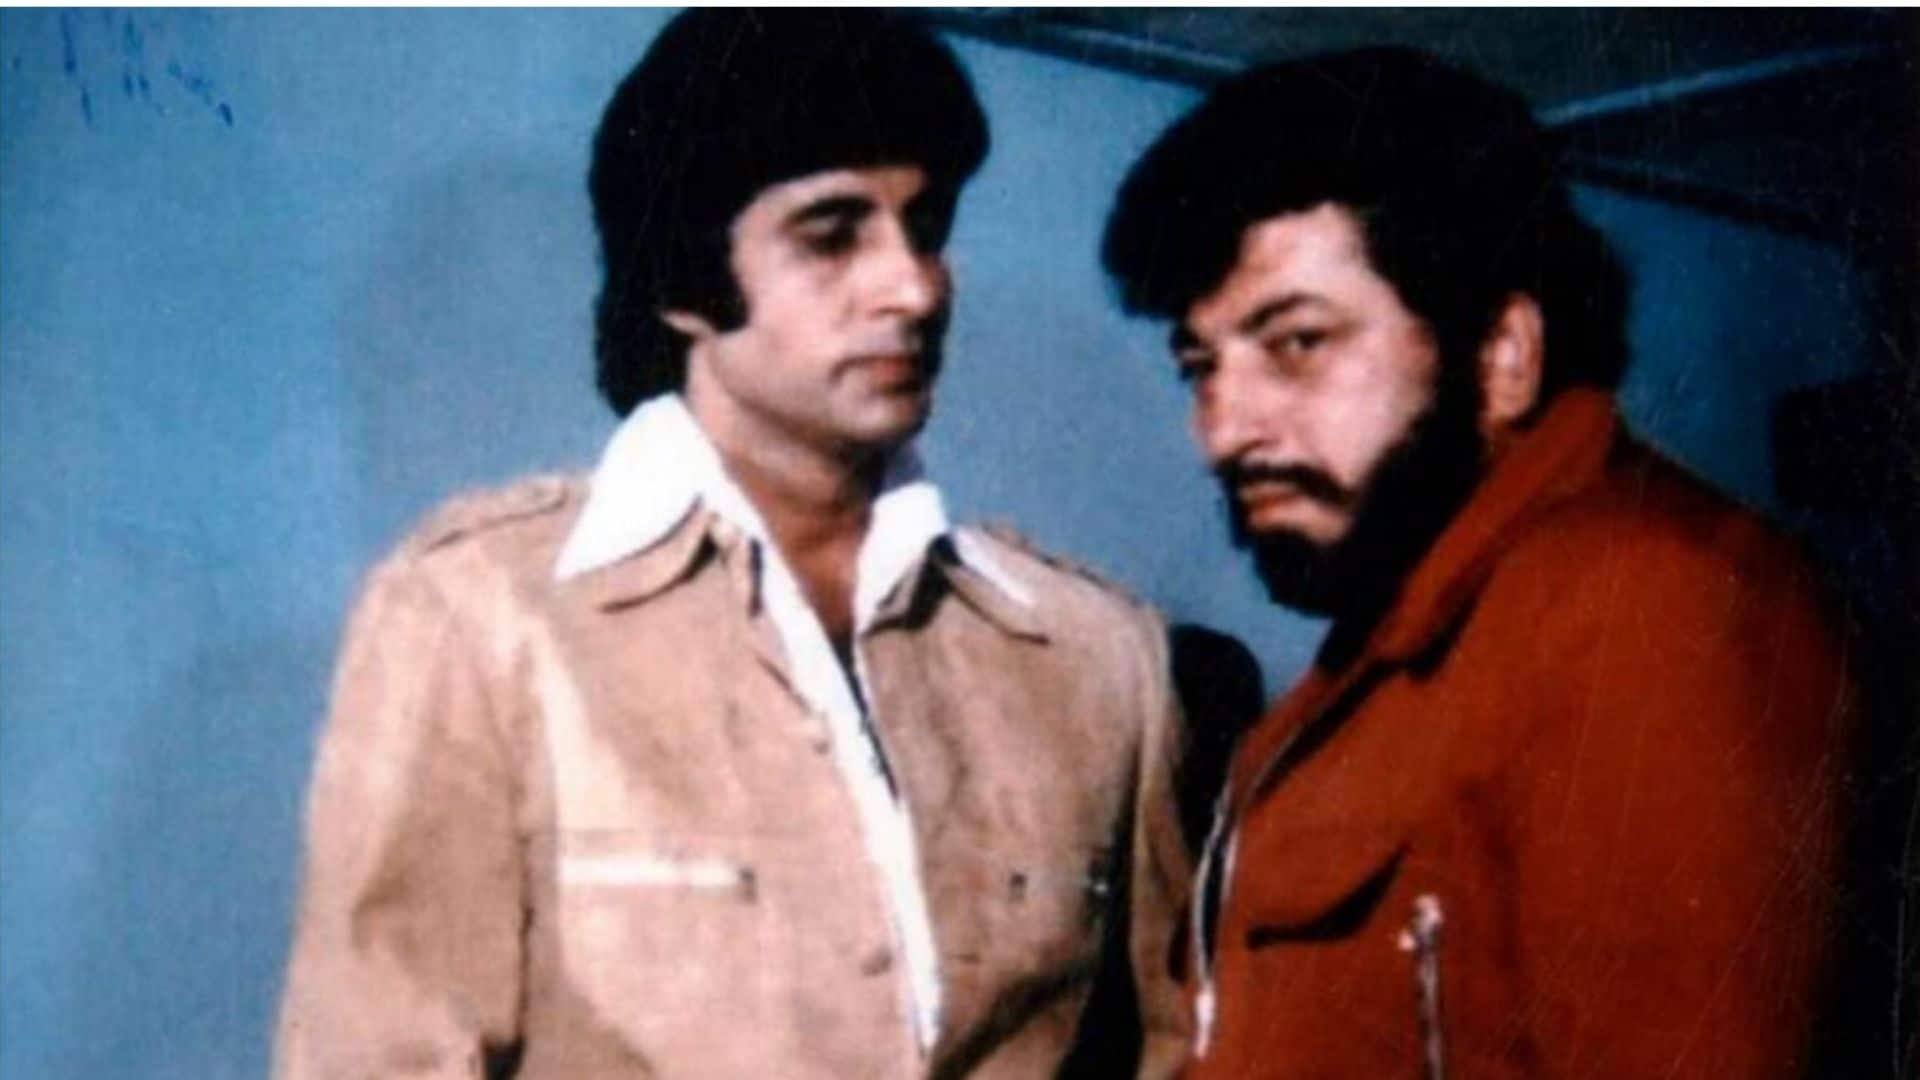 Amitabh Bachchan signed hospital papers for Amjad Khan's surgery after accident, says latter’s wife